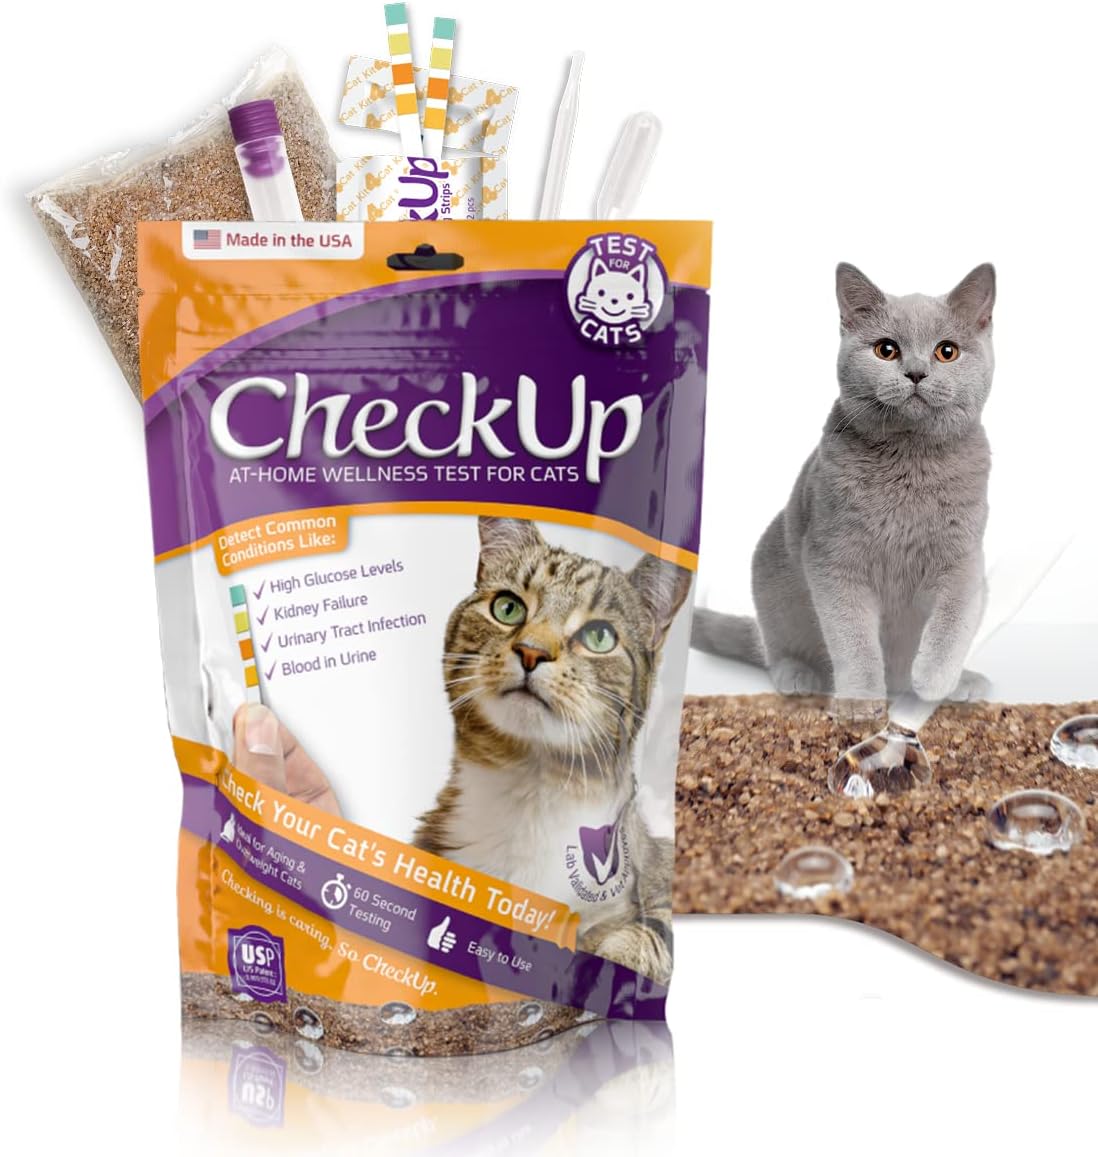 checkup at home wellness test kit for cats 2lb hydrophobic litter for urine collection 2 test strips for the detection o